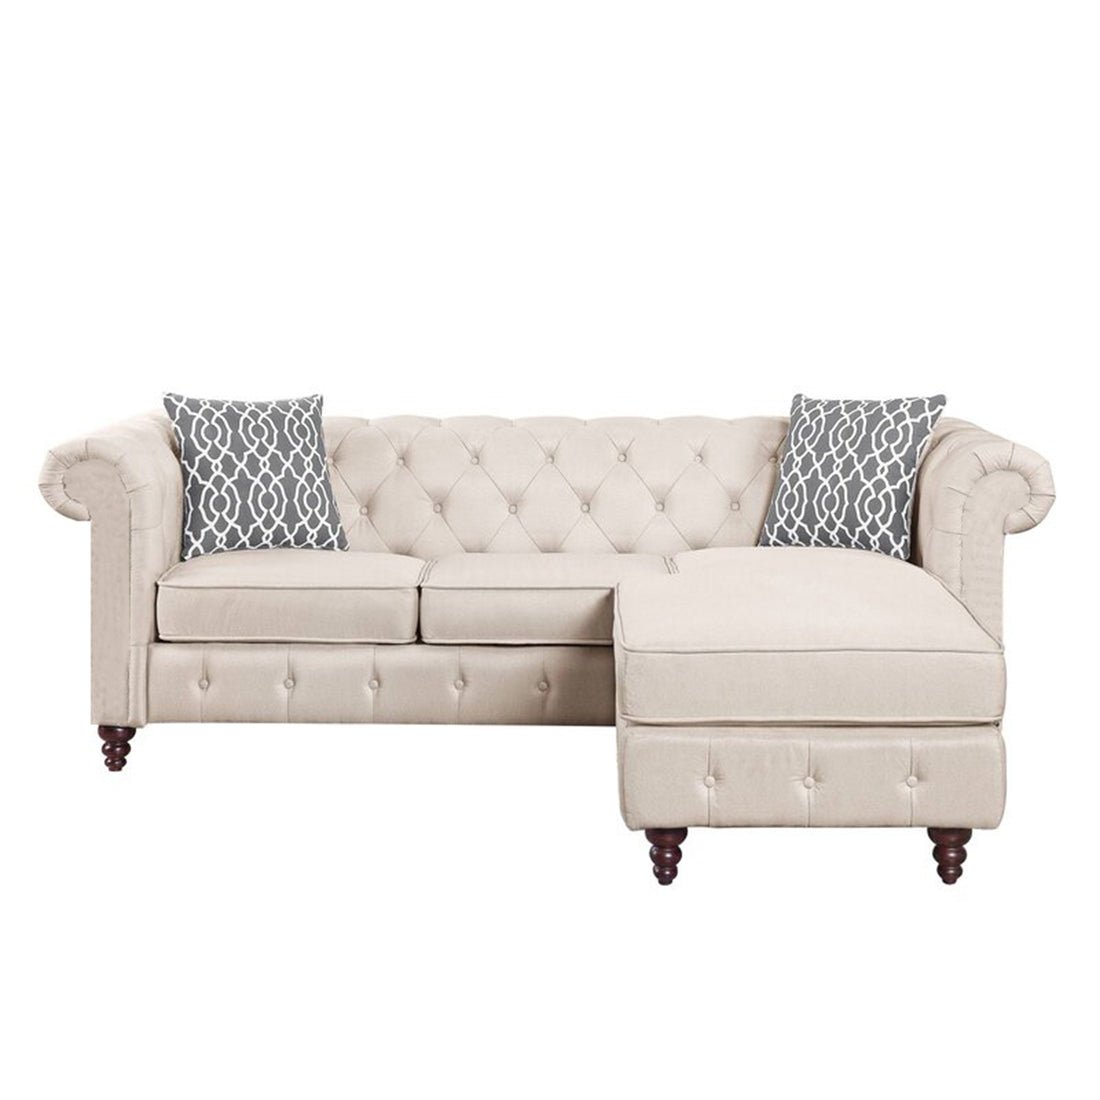 Torque India Sage Solid Wood 3 Seater Fabric Chesterfield Sofa With Ottoman - TorqueIndia